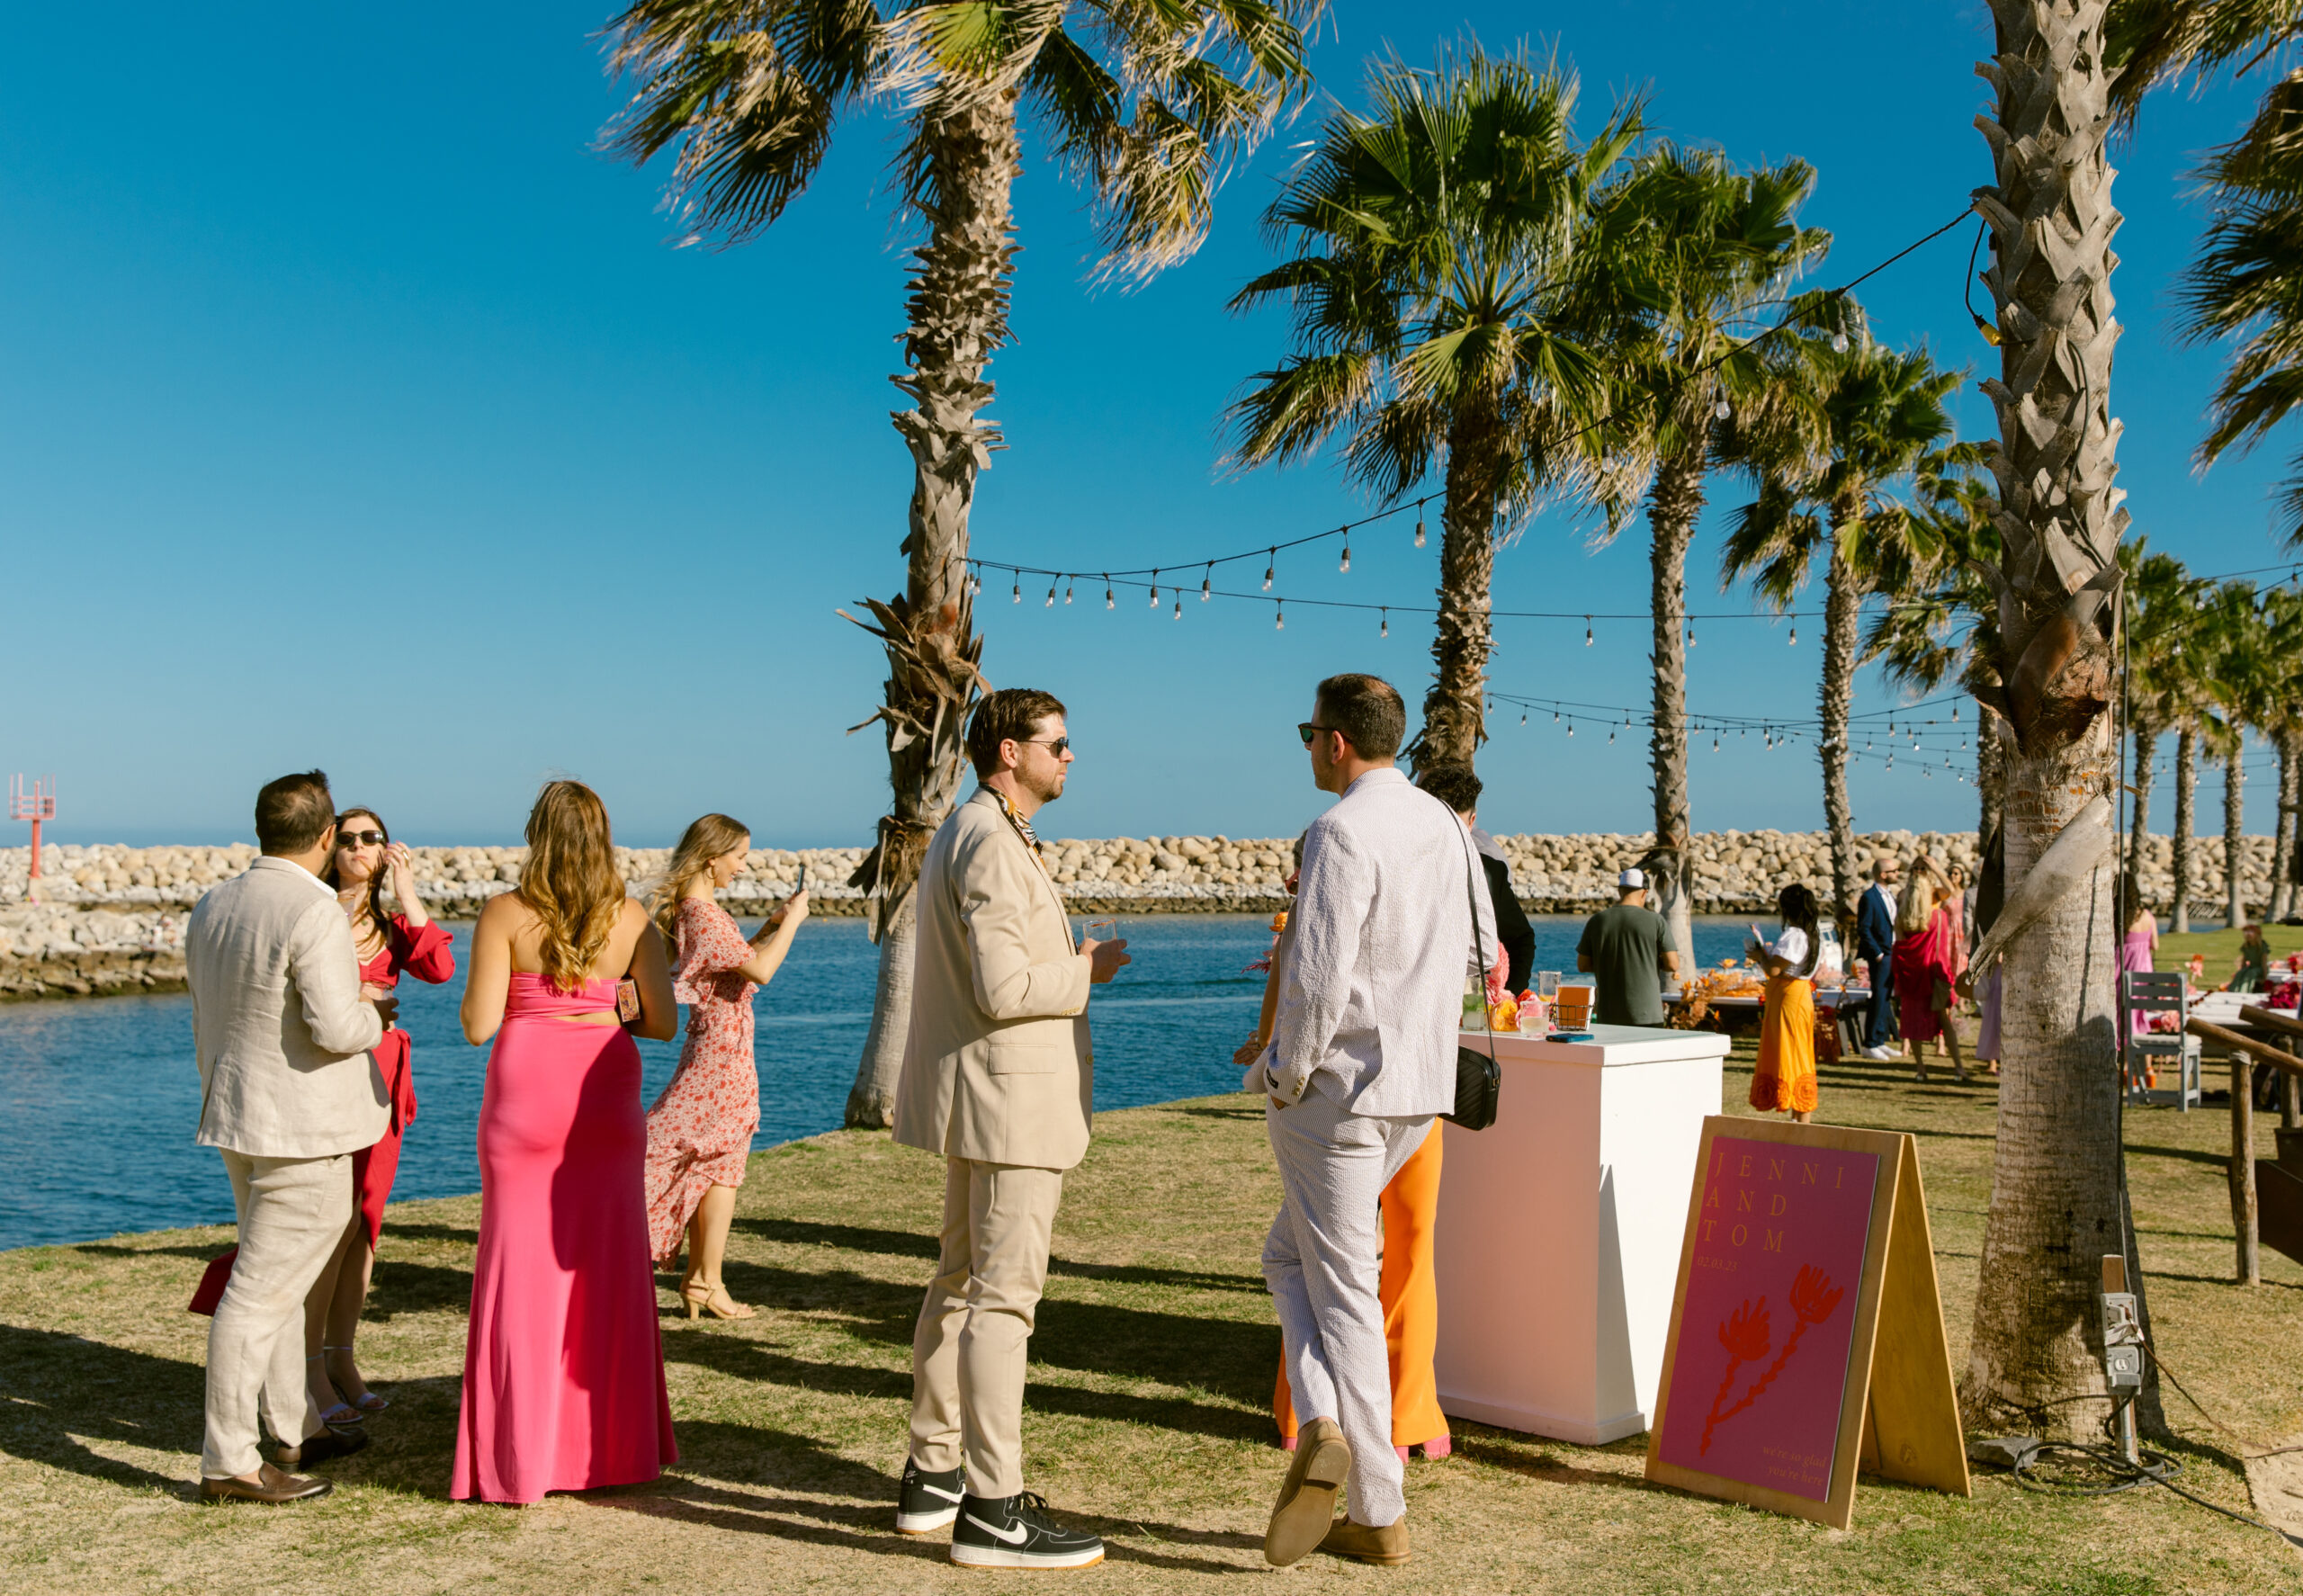 unique and colorful wedding ceremony florals. mexico wedding ceremony on jetti at beach club. ocean beach view in the background. palm trees white sand beaches. blue clear ocean water. blue skies. palm tree runway. colorful wedding guest attire. custom colorful wedding welcome sign pink orange and yellow